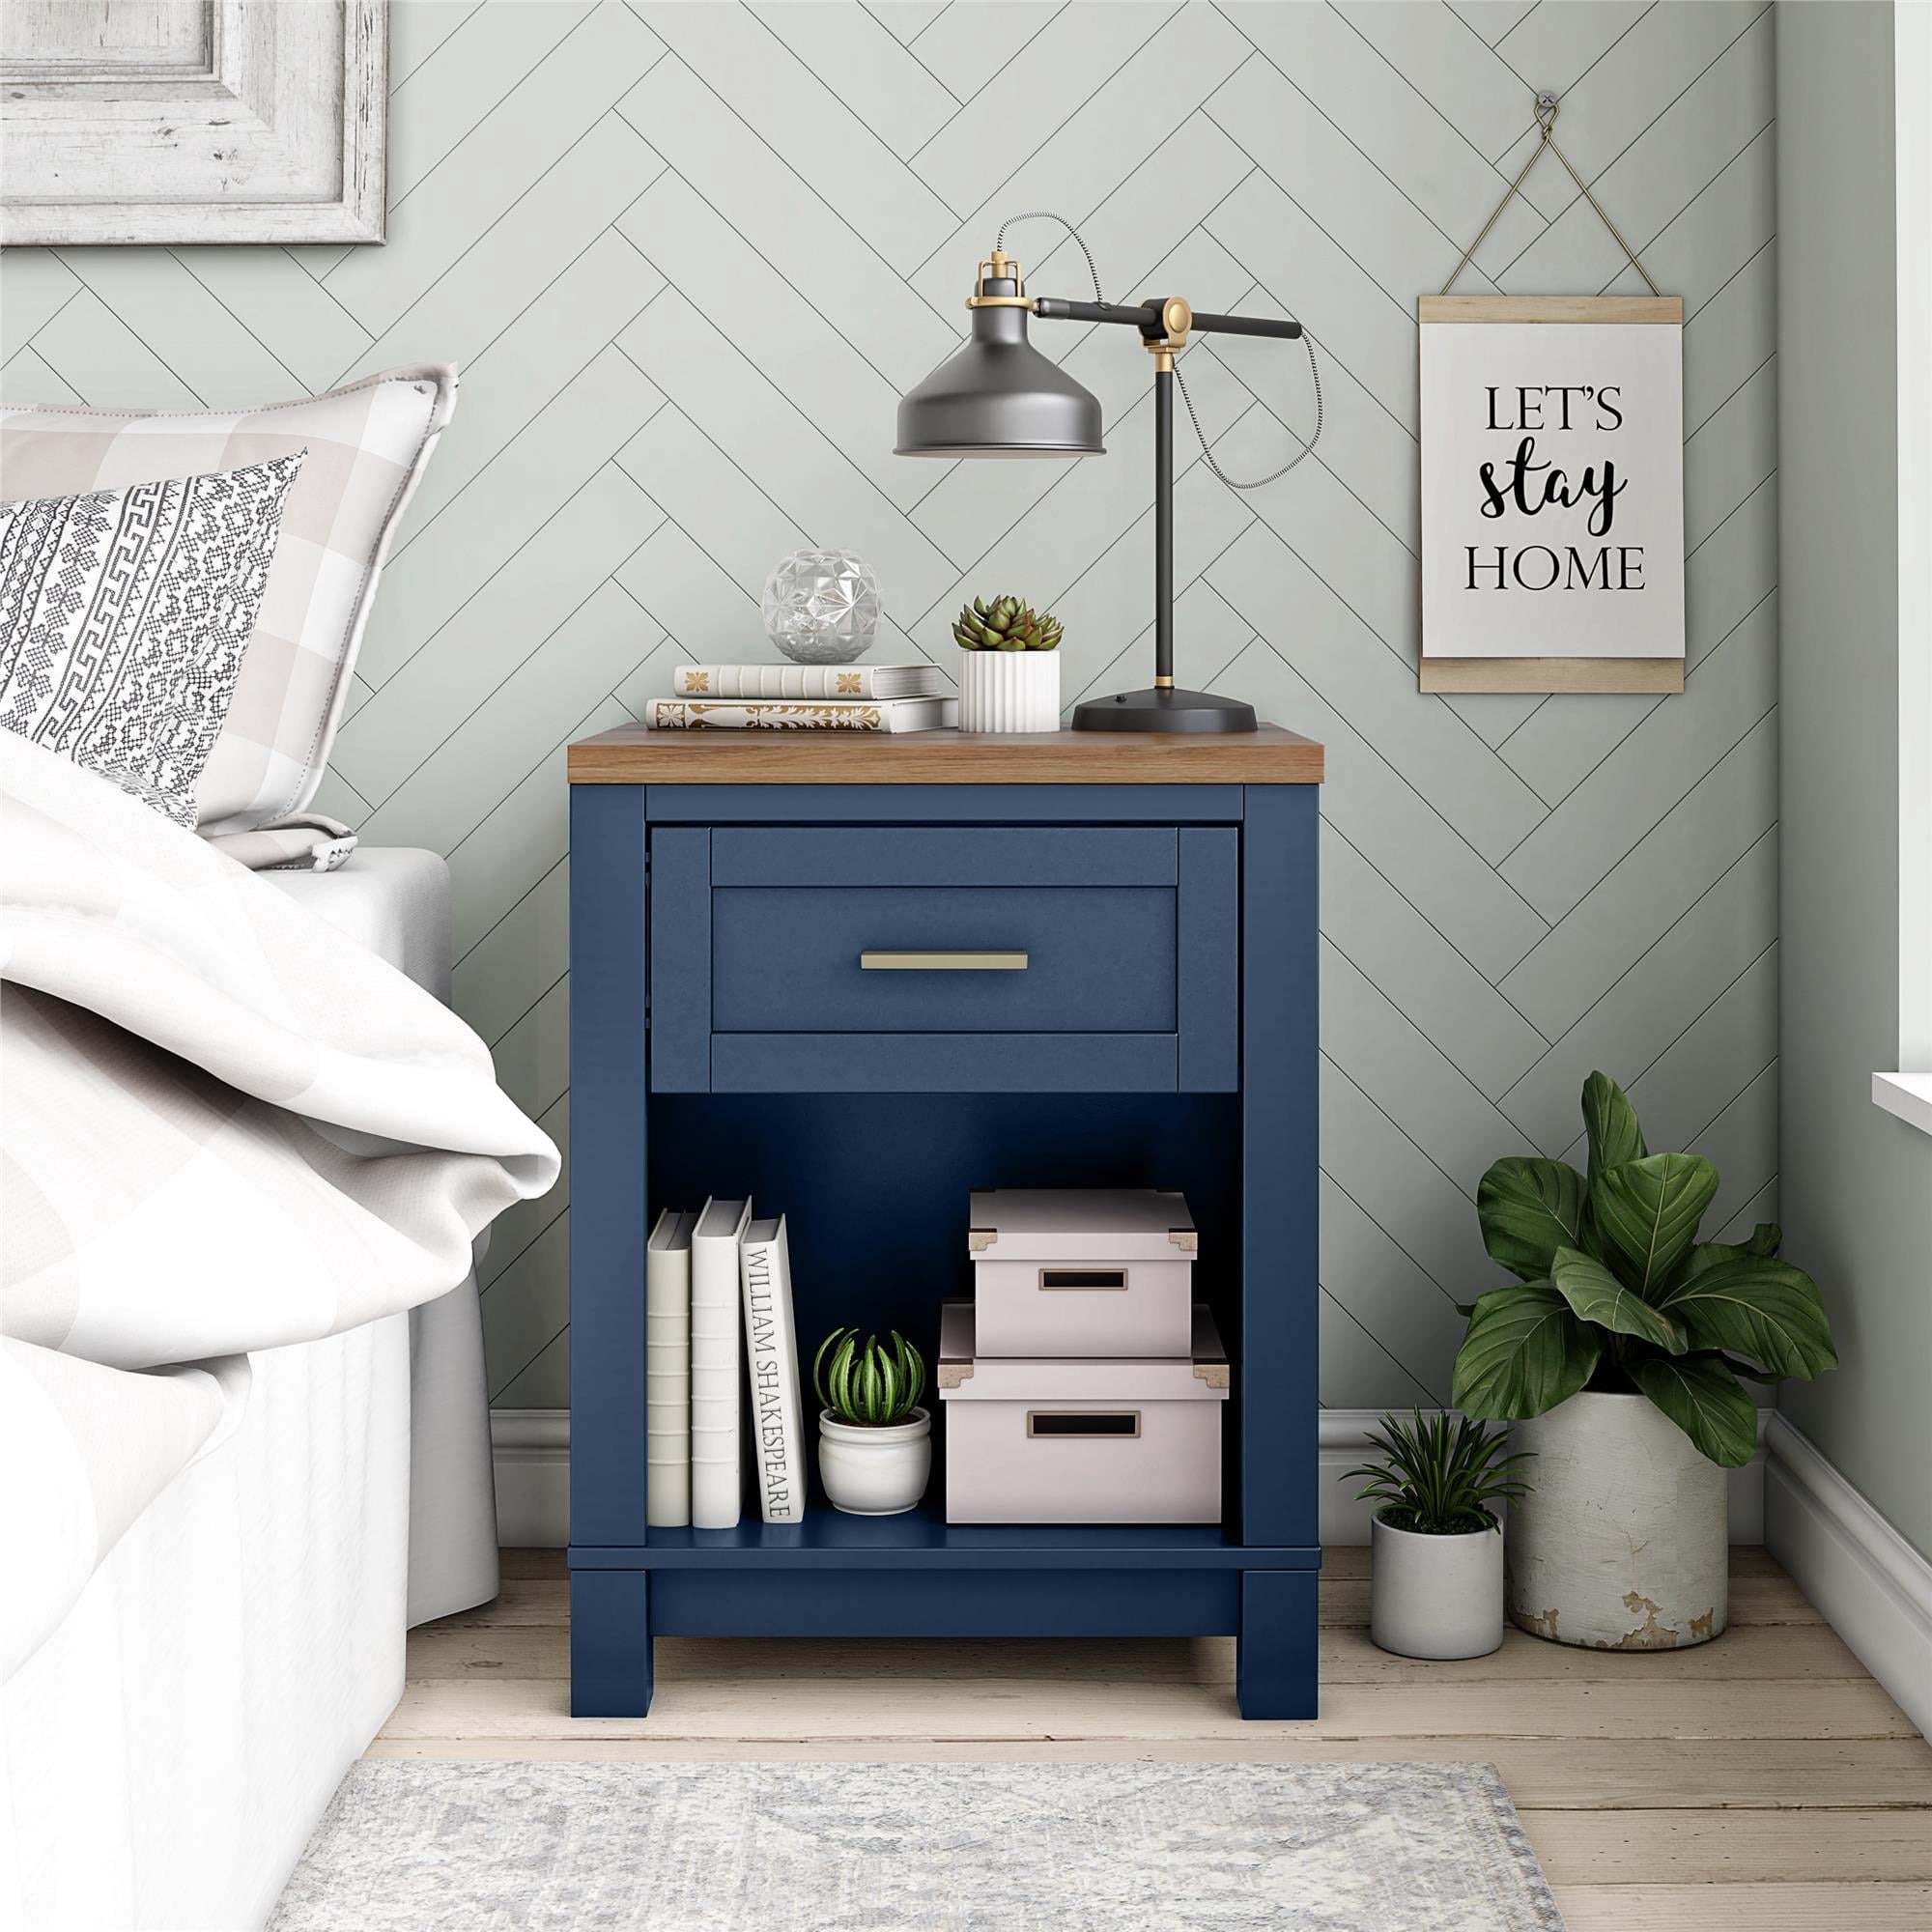 the nightstand in blue